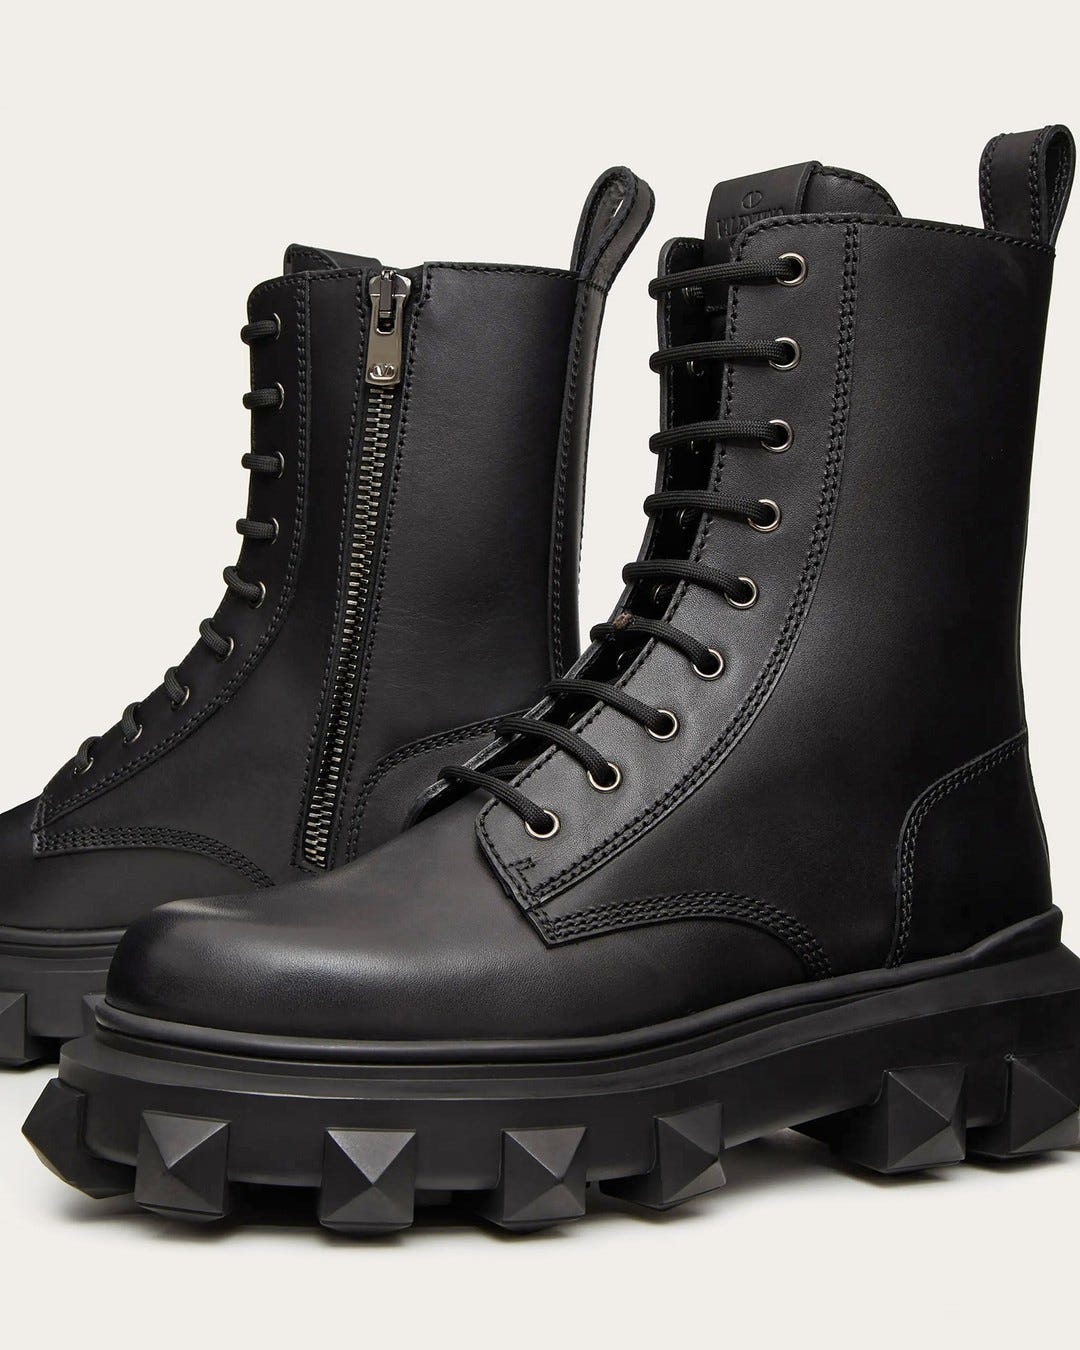 COMBAT STYLES: complete your edit with these Trackstud from @maisonvalentino. These classic combat boots have been punctuated with the brand's staple Roman Stud detail. Available on genteroma.com and in store at Via del Babuiono, 185.

#GenteRoma #ValentinoGaravani #SS22